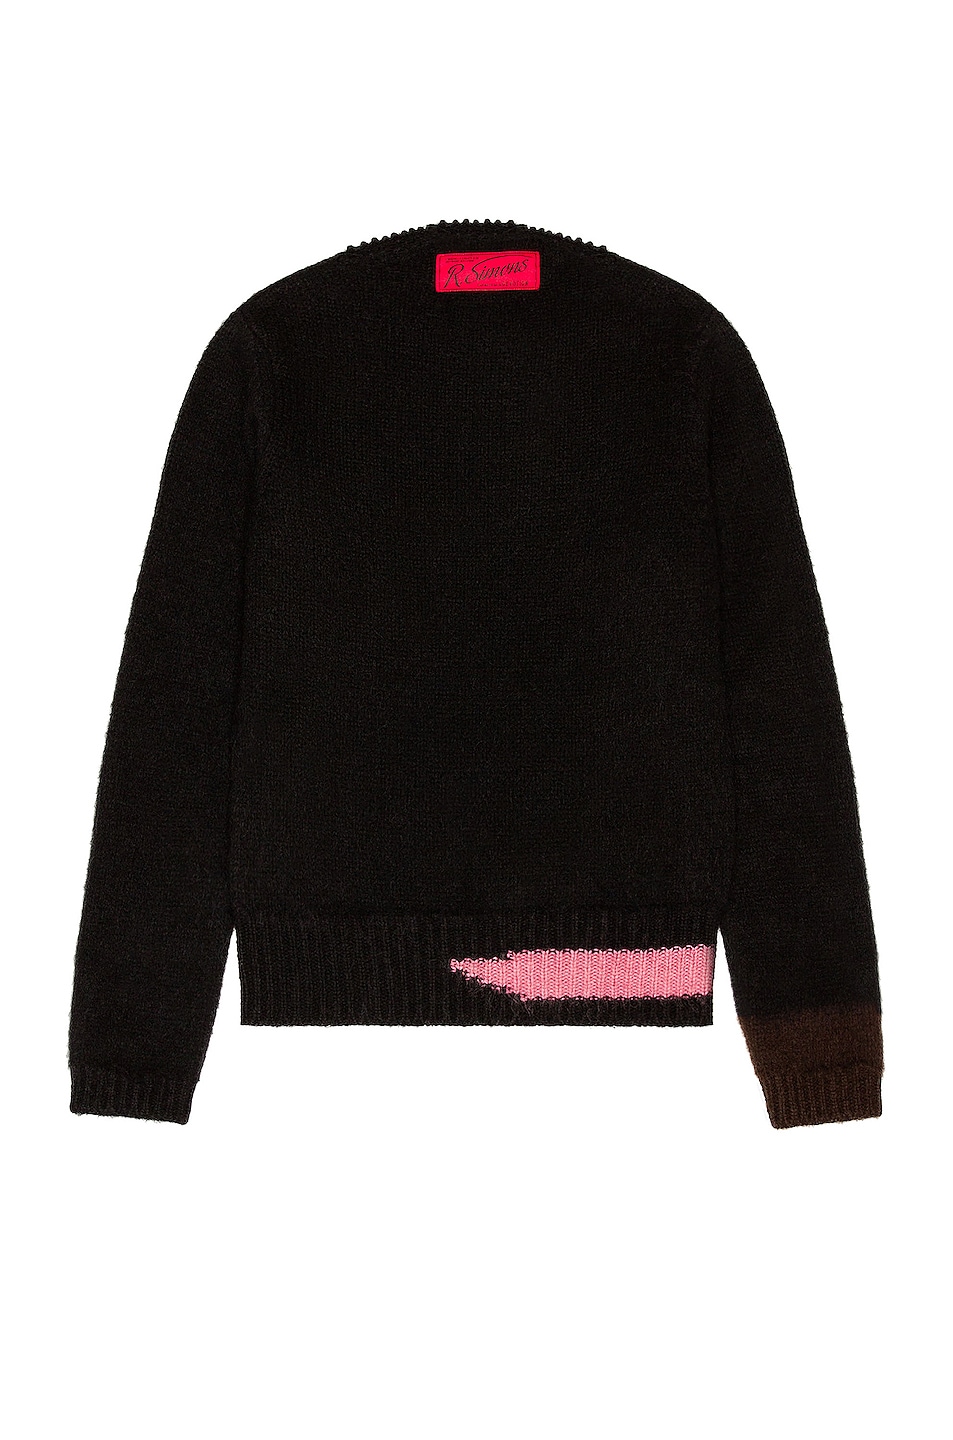 Image 1 of Raf Simons Vintage Knit Sweater in Black